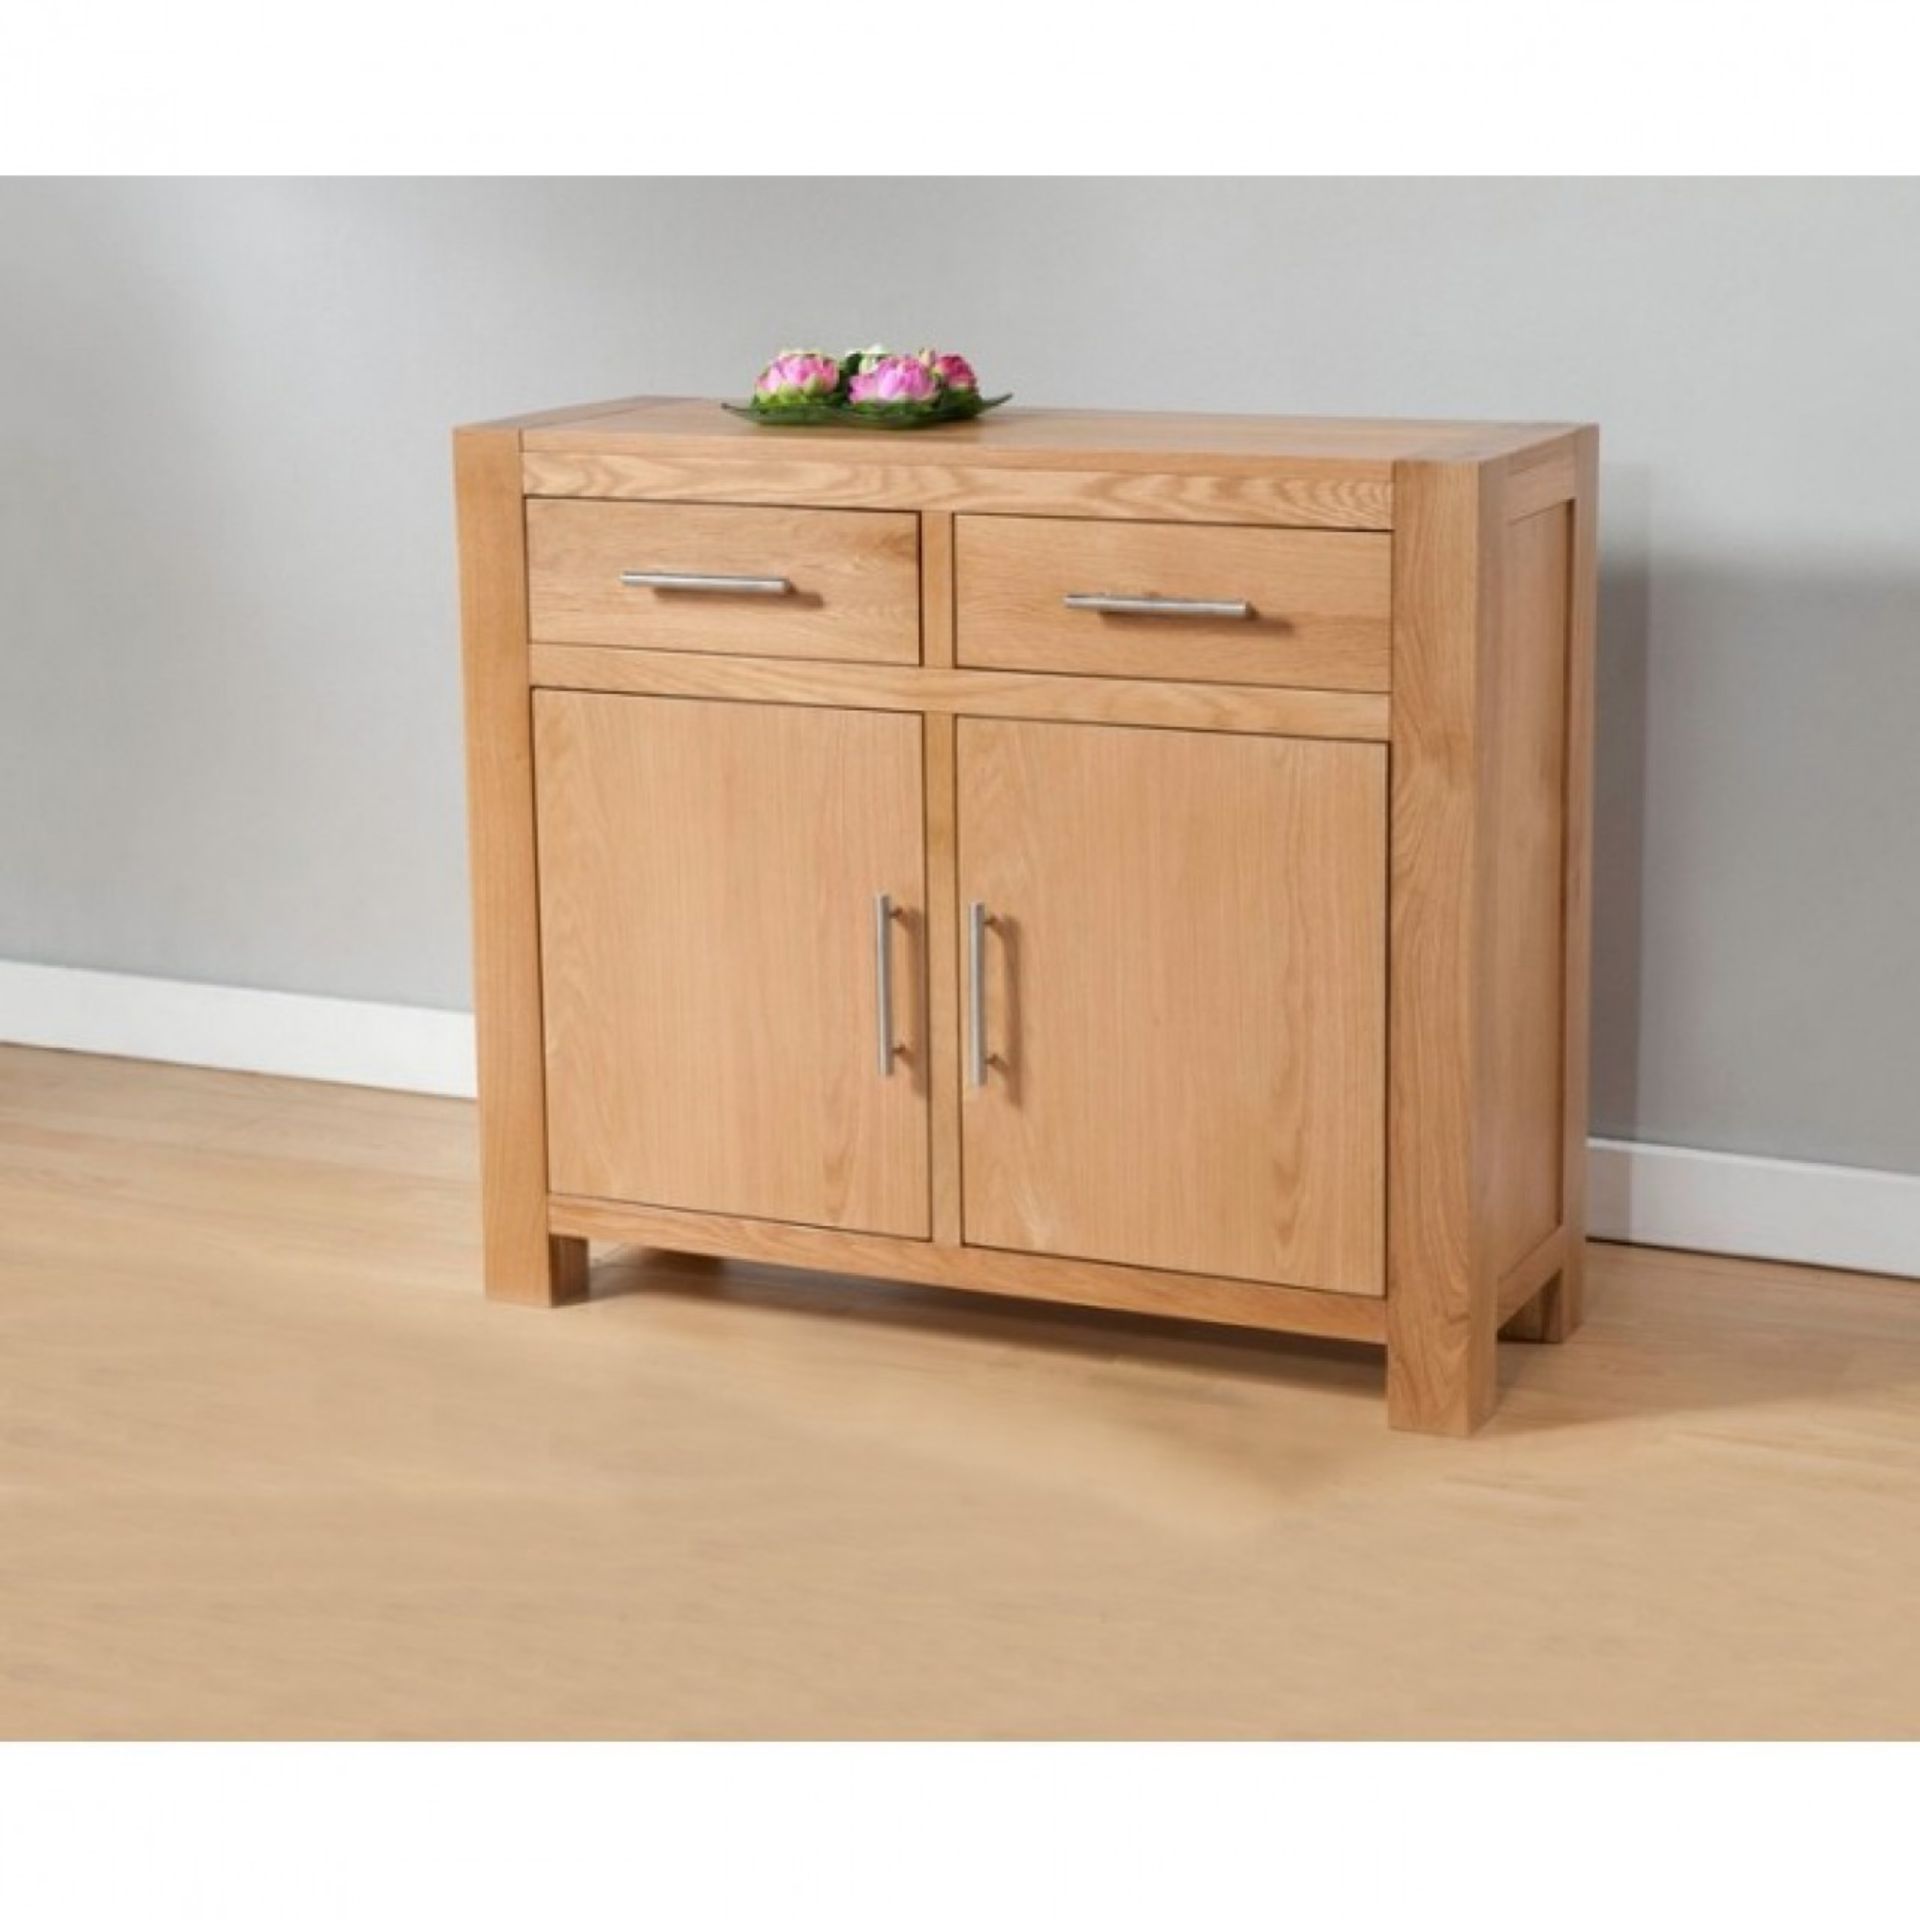 V Grade A Brand New Lucerne Oak Sideboard Wiuth Two Doors And Two Drawers RRP: £269.99